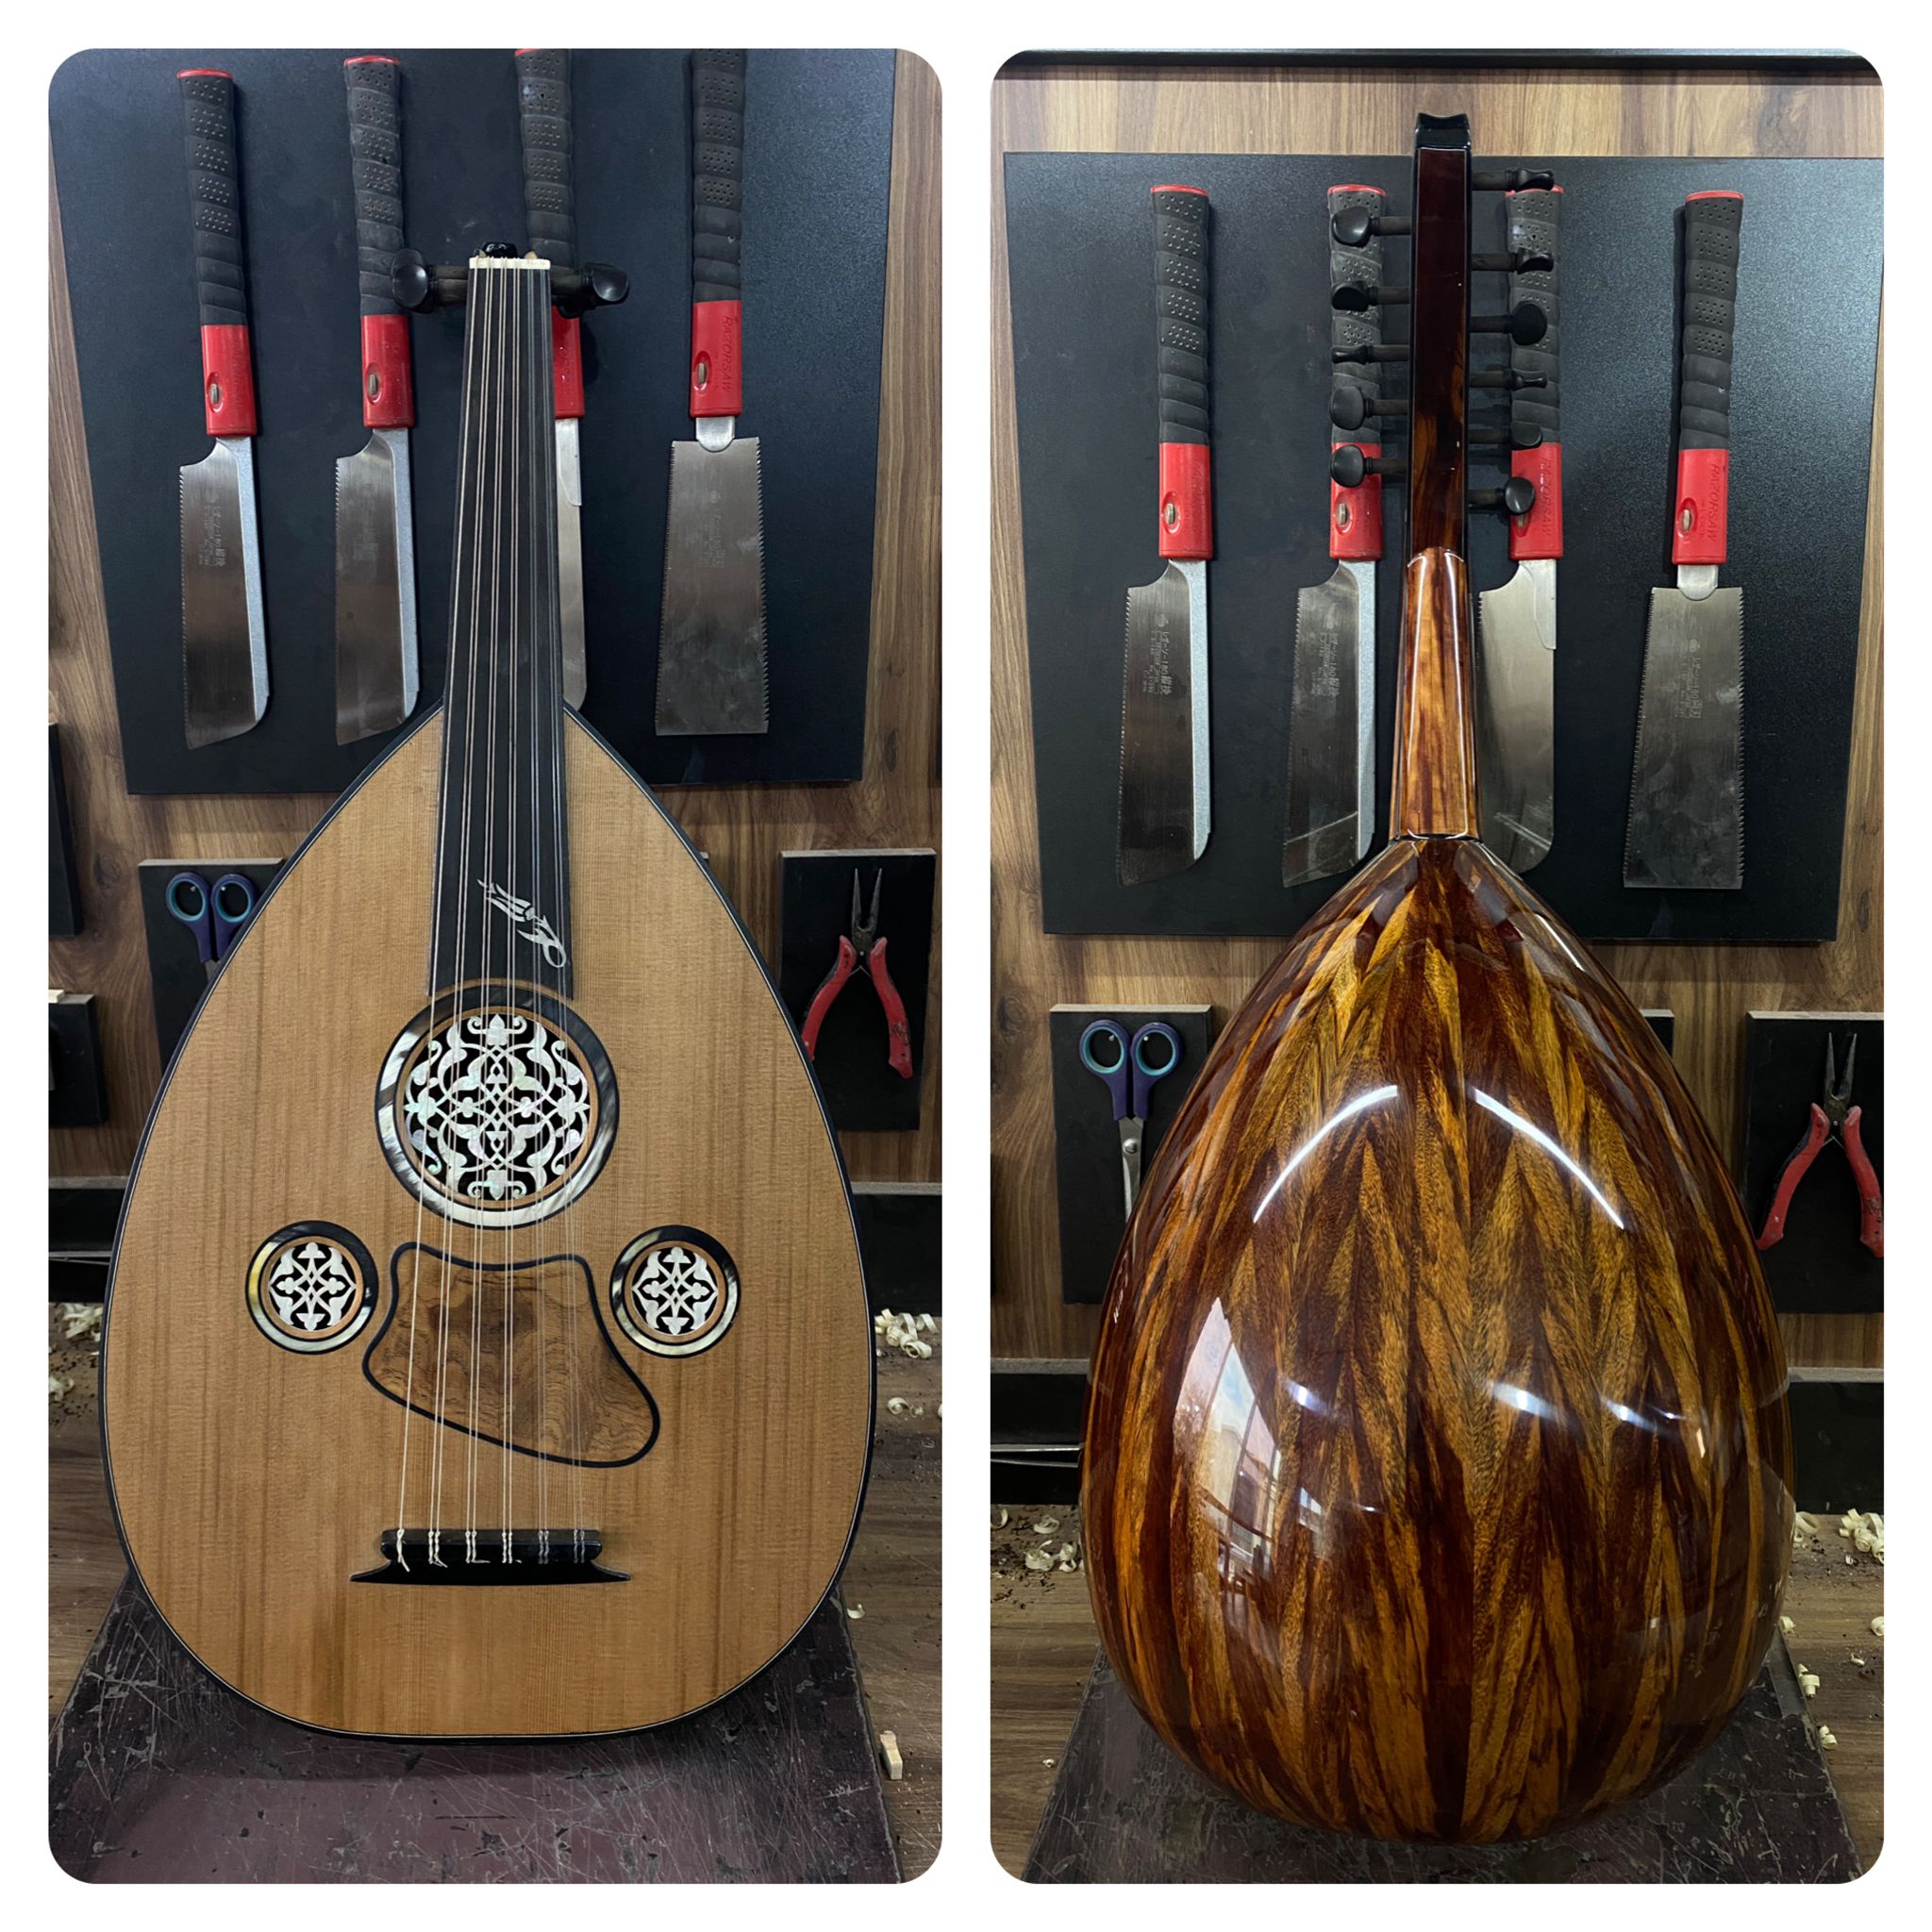 Meet the Oud “King Of all the Instruments”